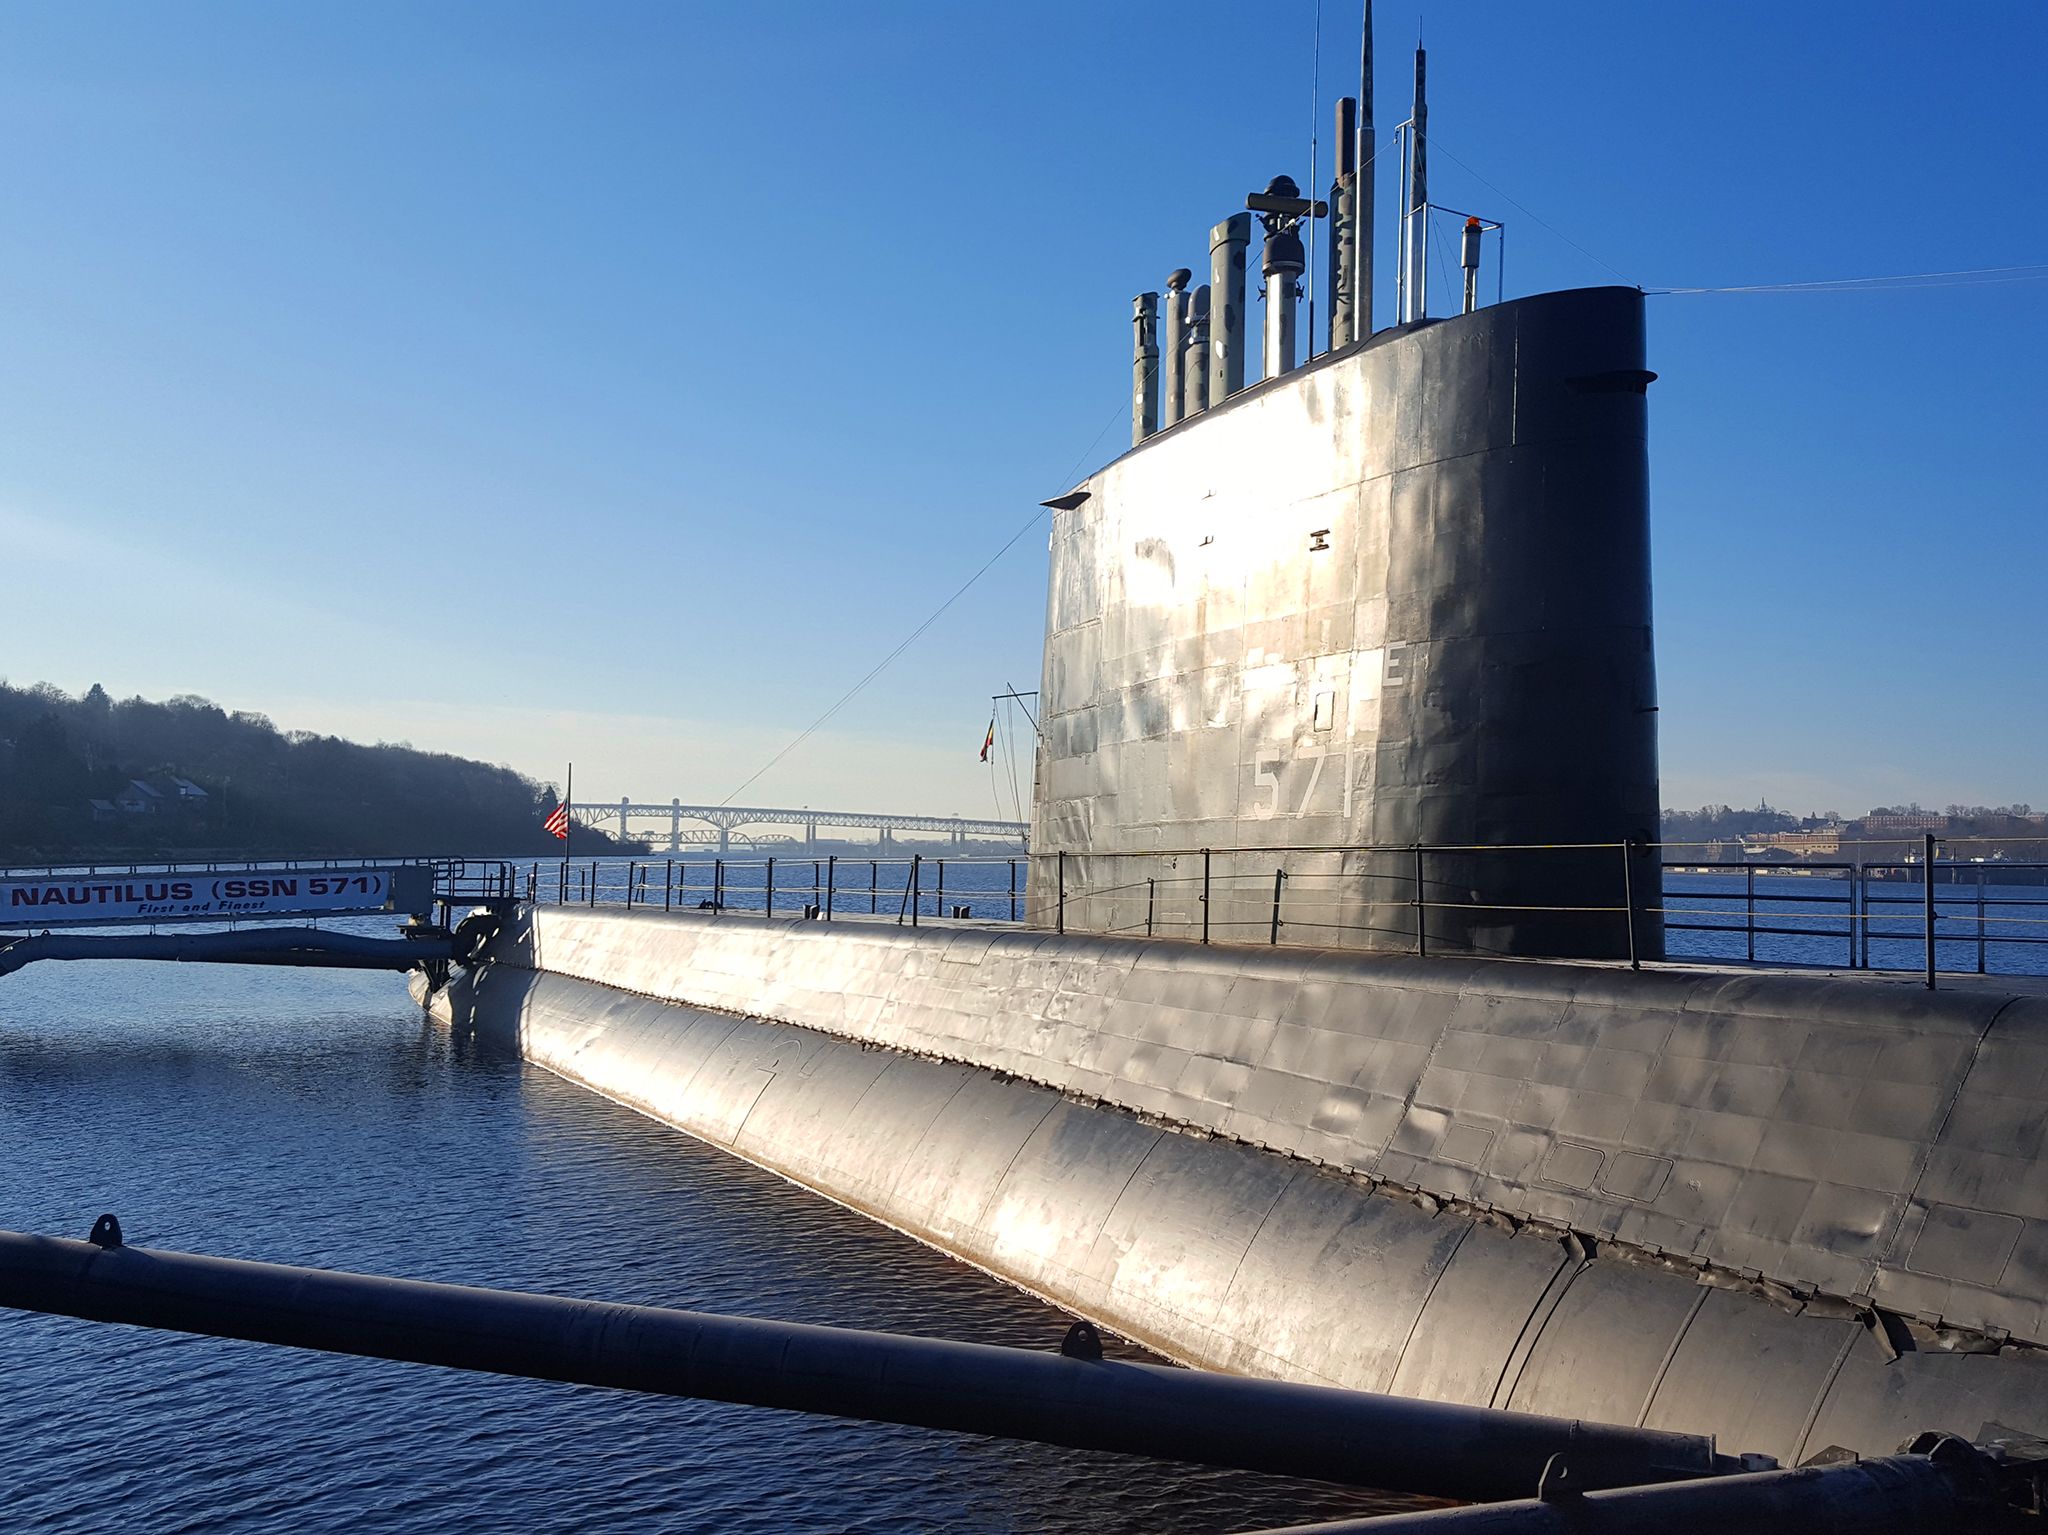 USS Nautilus:  the world's first nuclear-powered submarine.  This image is from Drain the Oceans. [Photo of the day - May 2019]